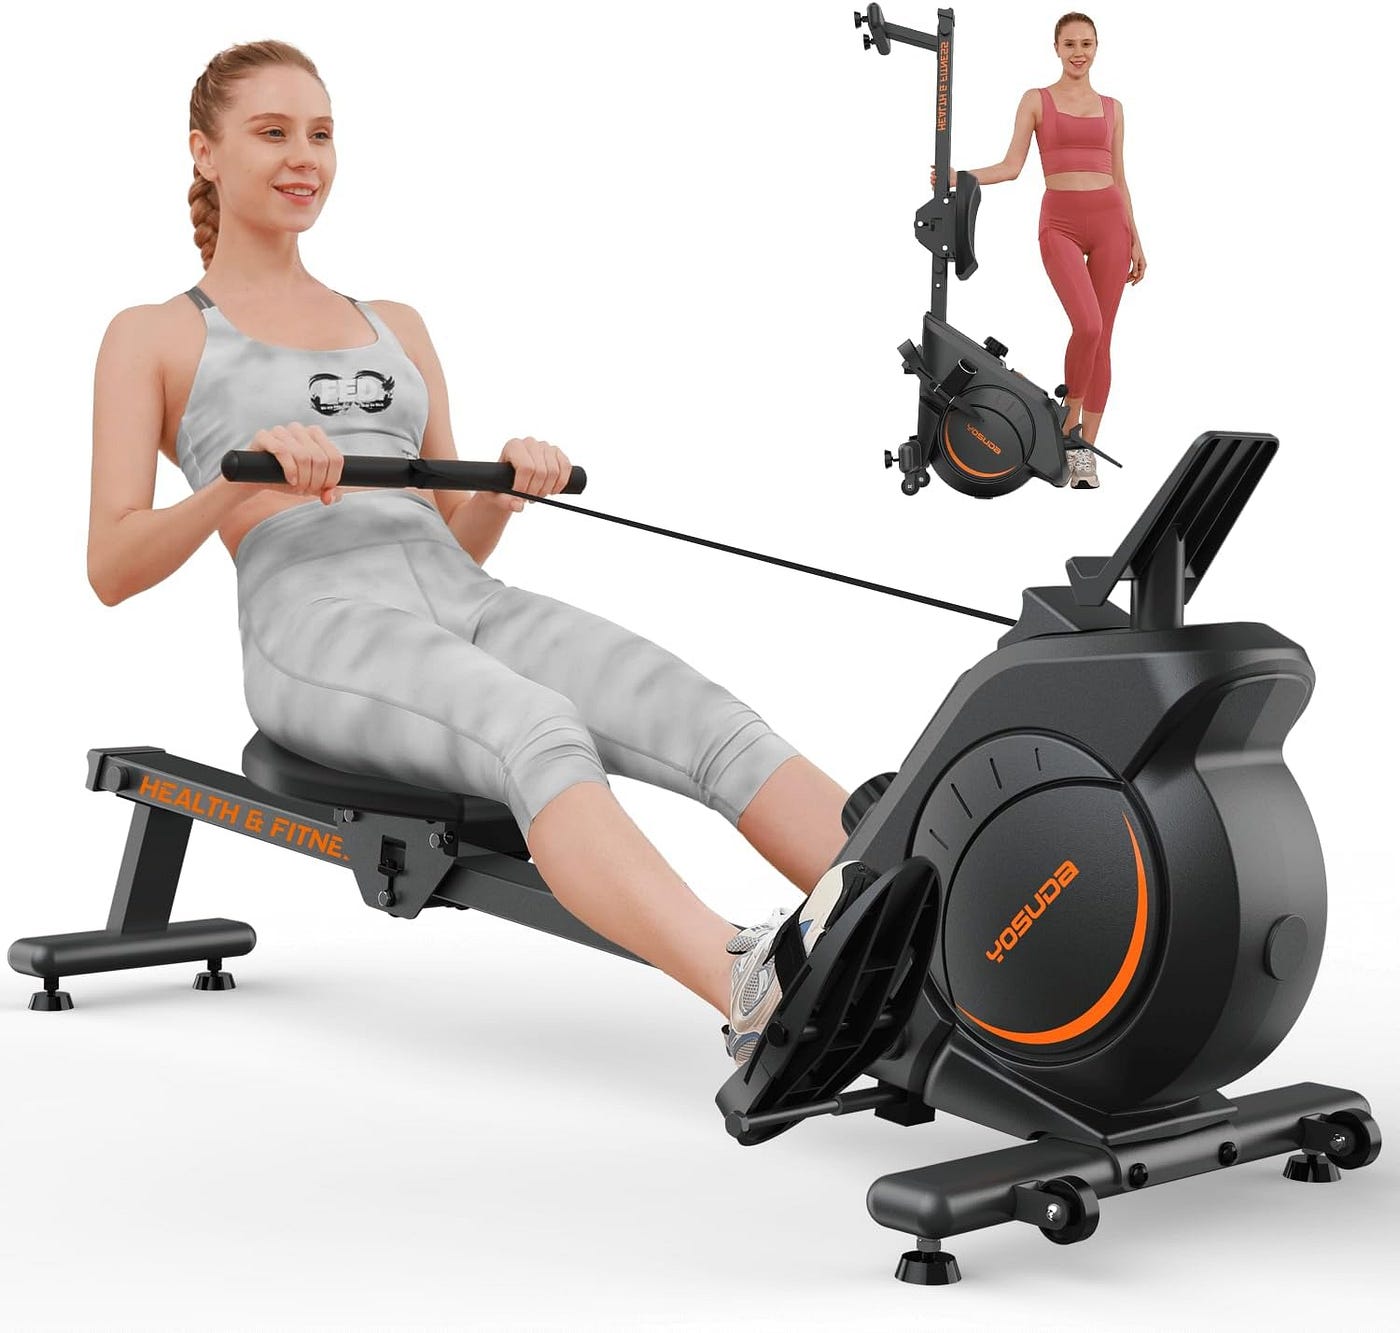 Elevate Your Fitness Journey with YOSUDAs Magnetic Rowing Machine The Ultimate Home Workout Companion by Bedjklm Sep, 2023 Medium